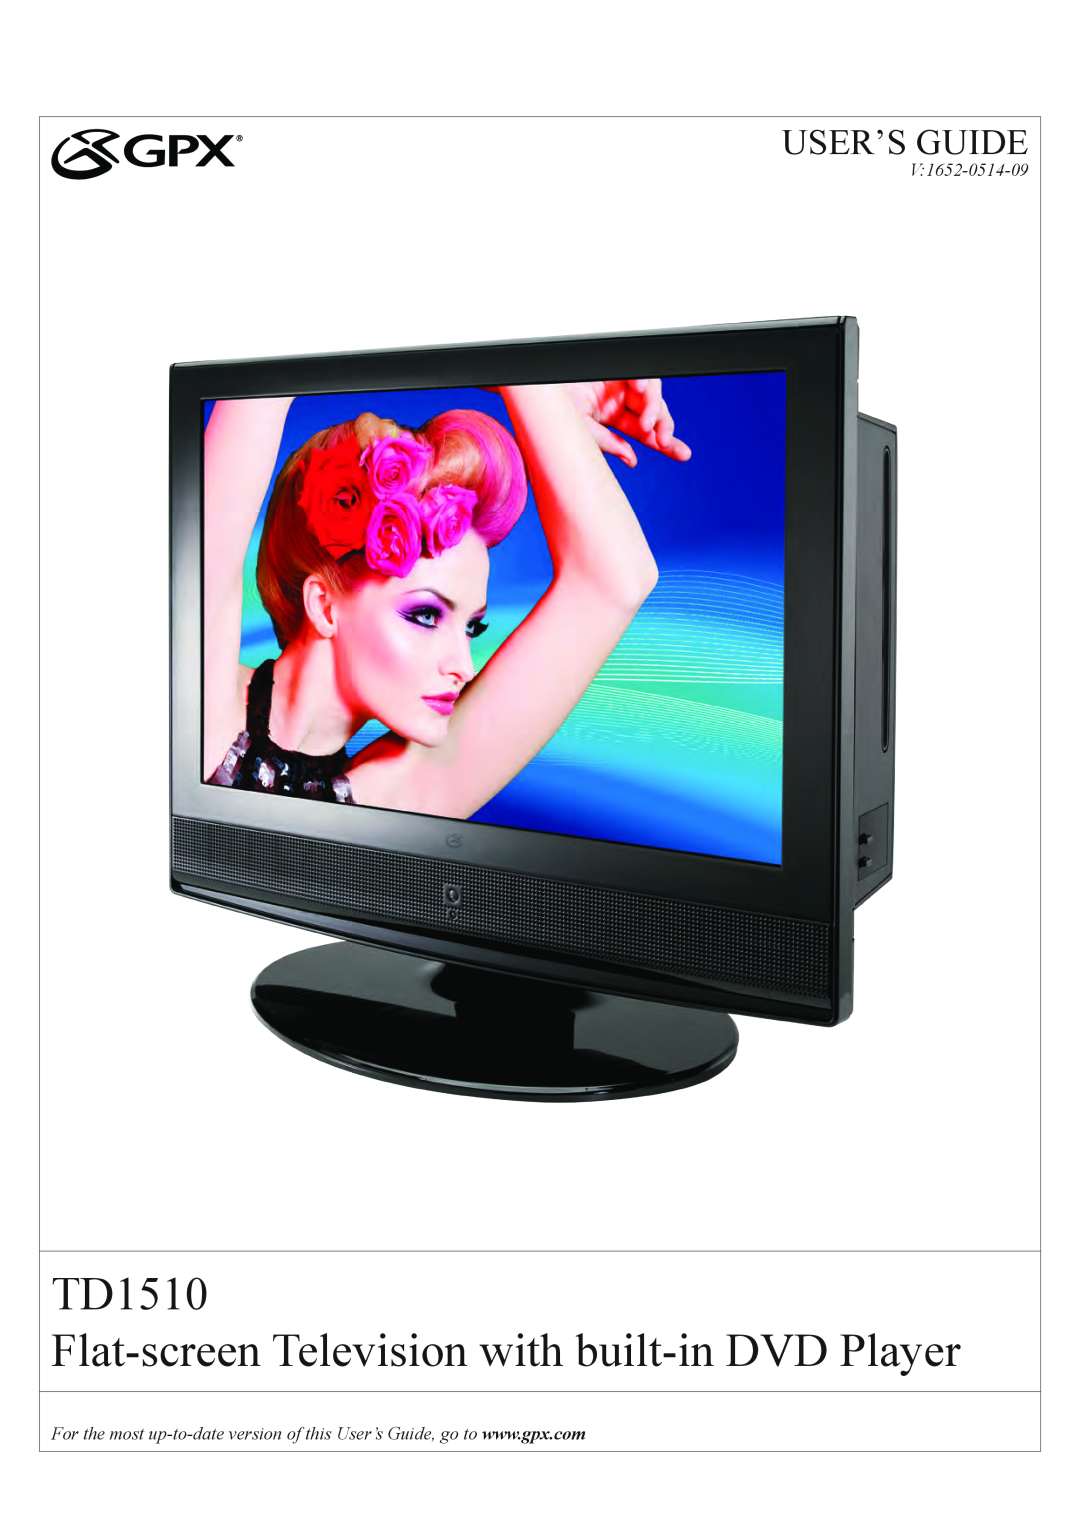 GPX manual TD1510 Flat-screen Television with built-in DVD Player, User’S Guide, V1652-0514-09 